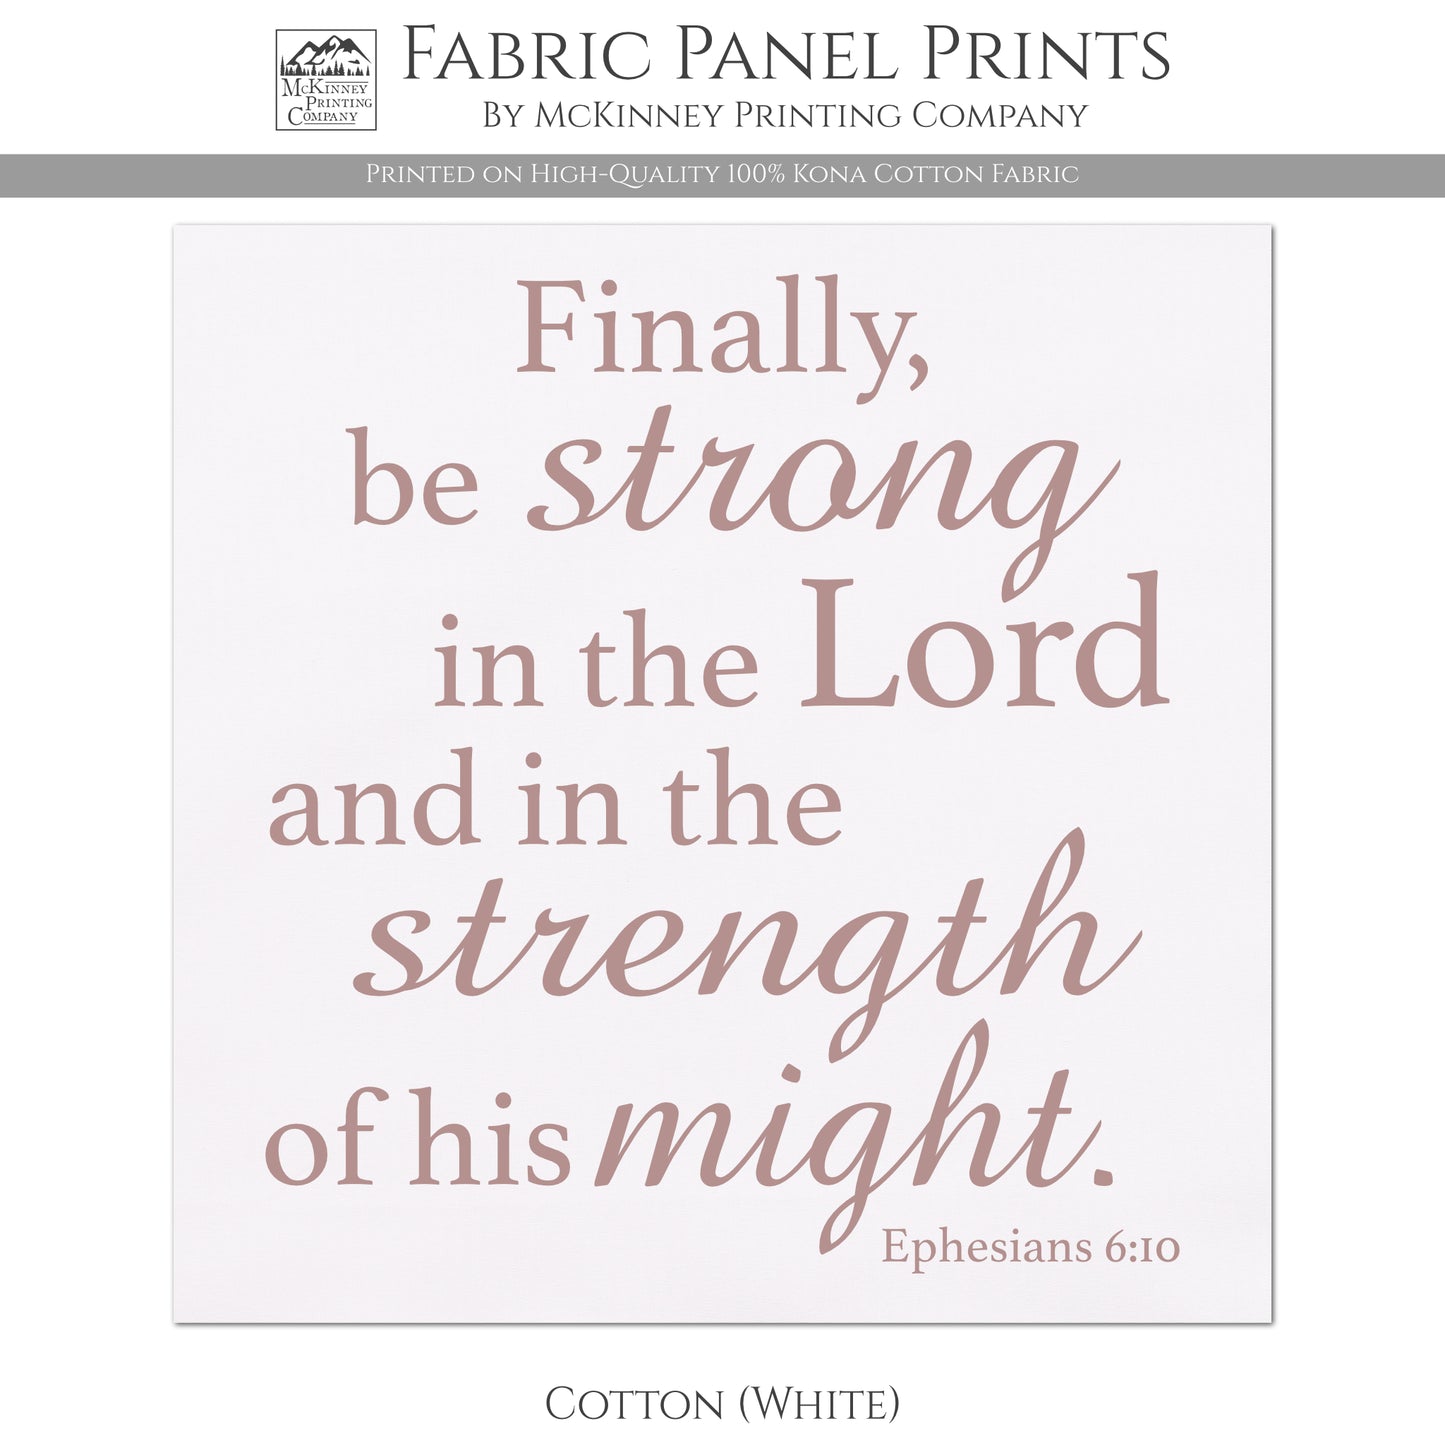 Finally be strong in the Lord and in the strength of his might - Ephesians 6:10 - Fabric Panel Print - Kona Cotton Fabric, White